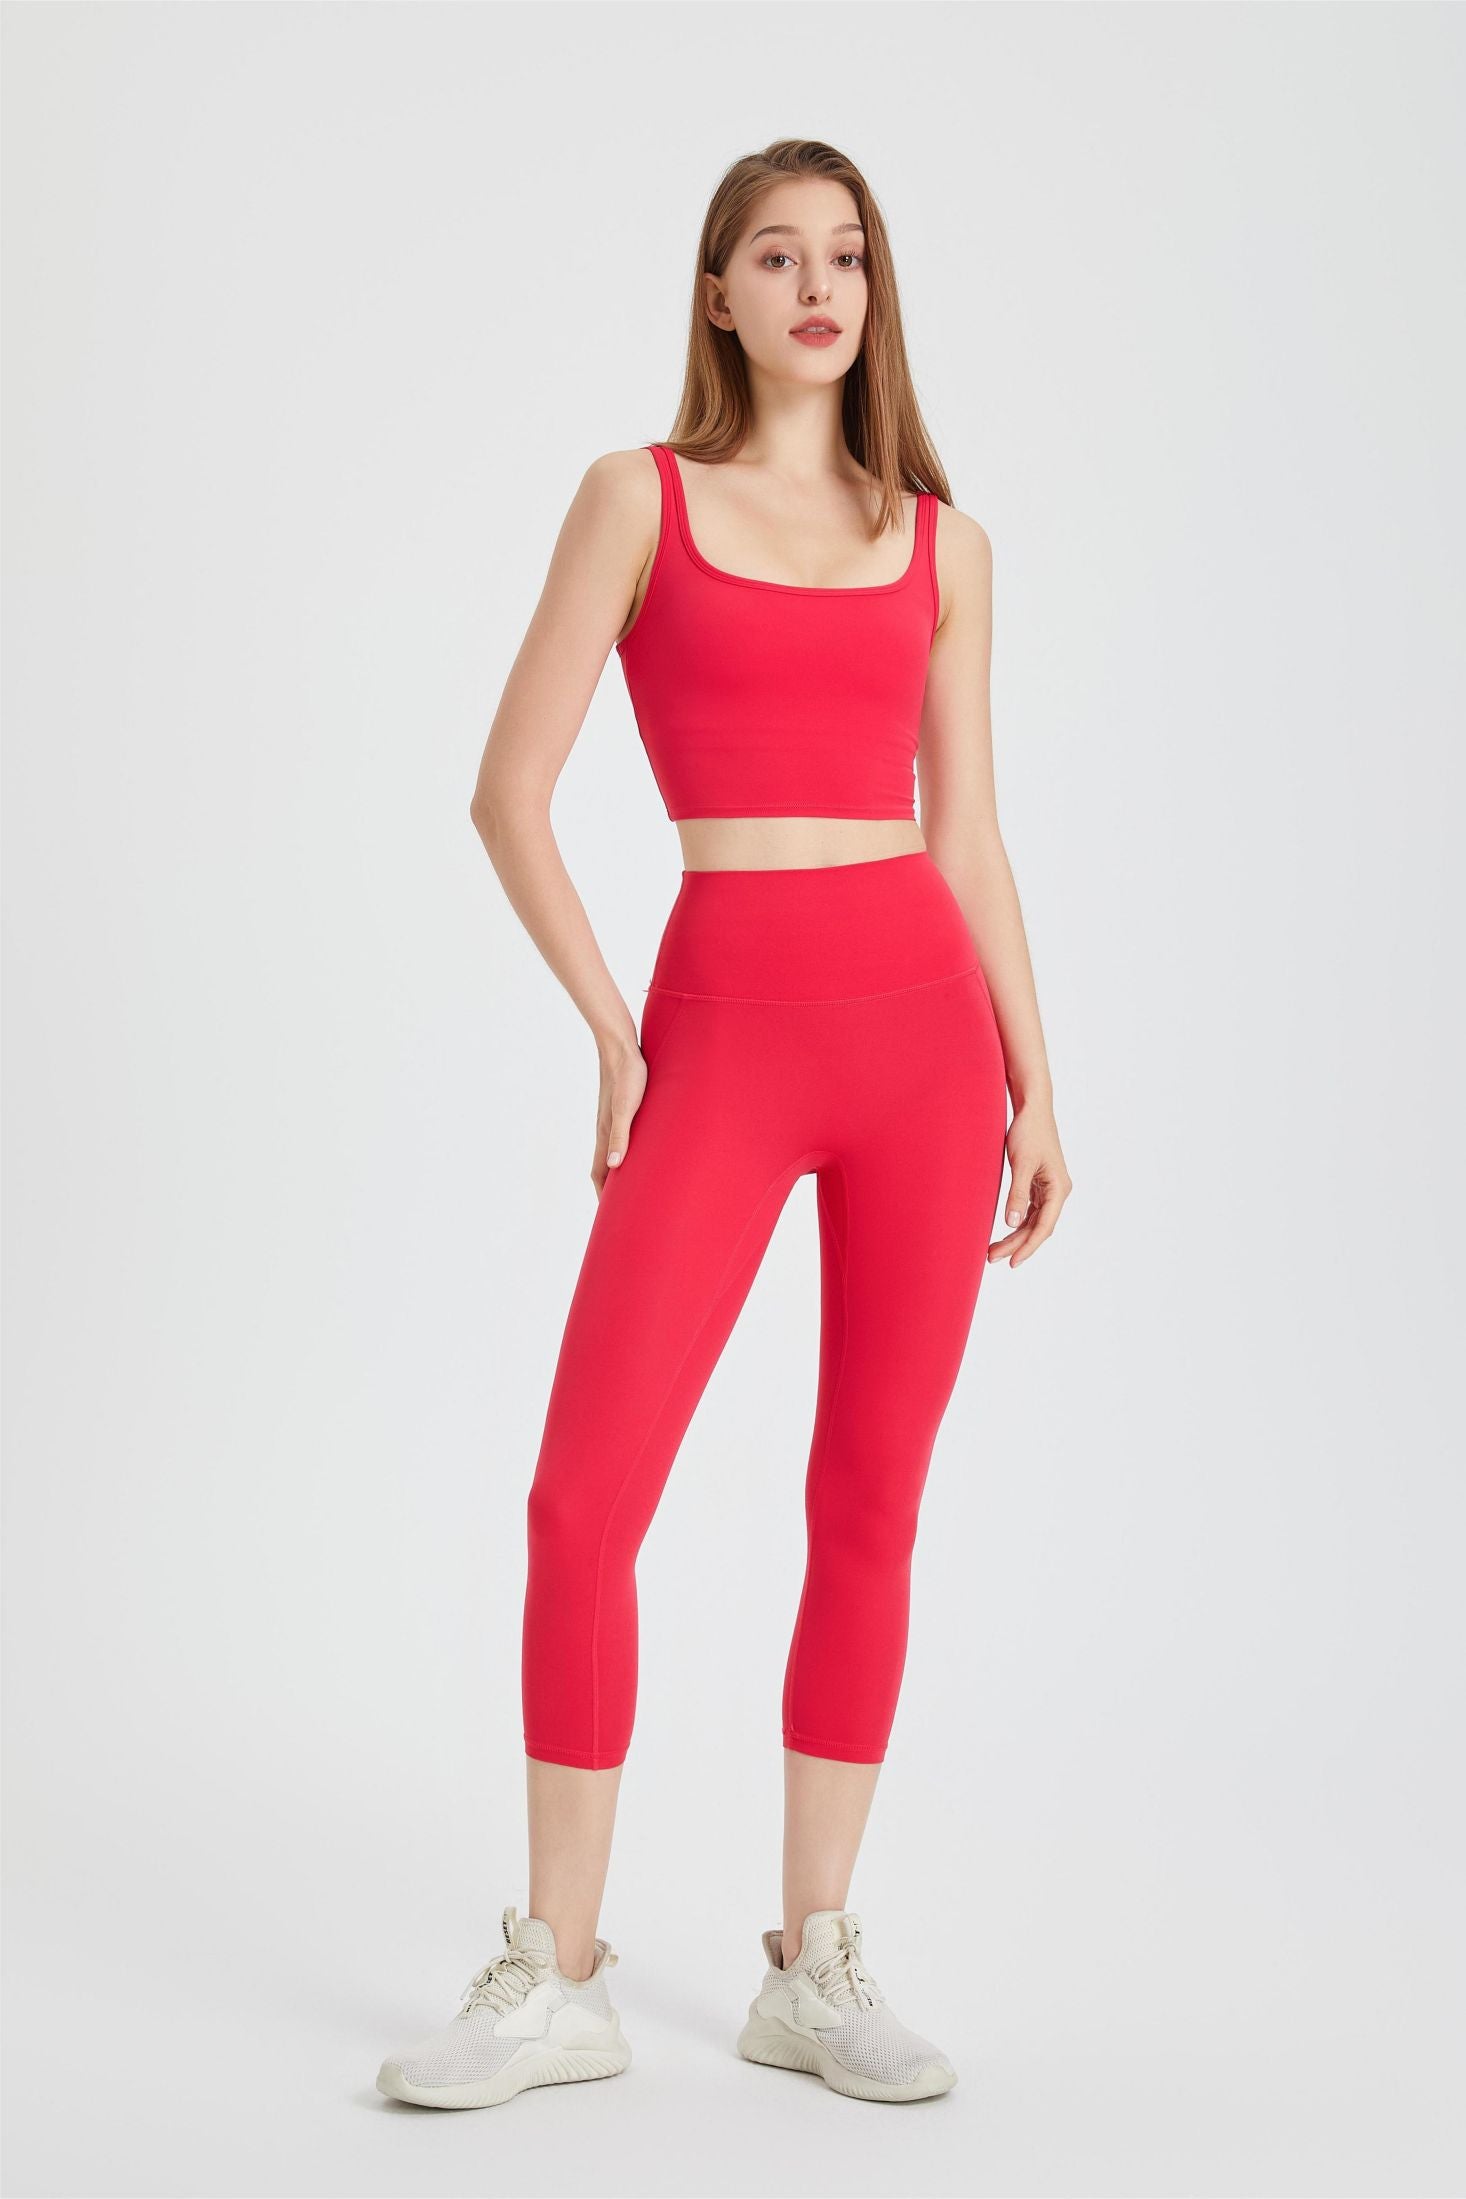 ZYIA Active Red Ascend High Rise Cropped Capri Leggings Size 6-8 